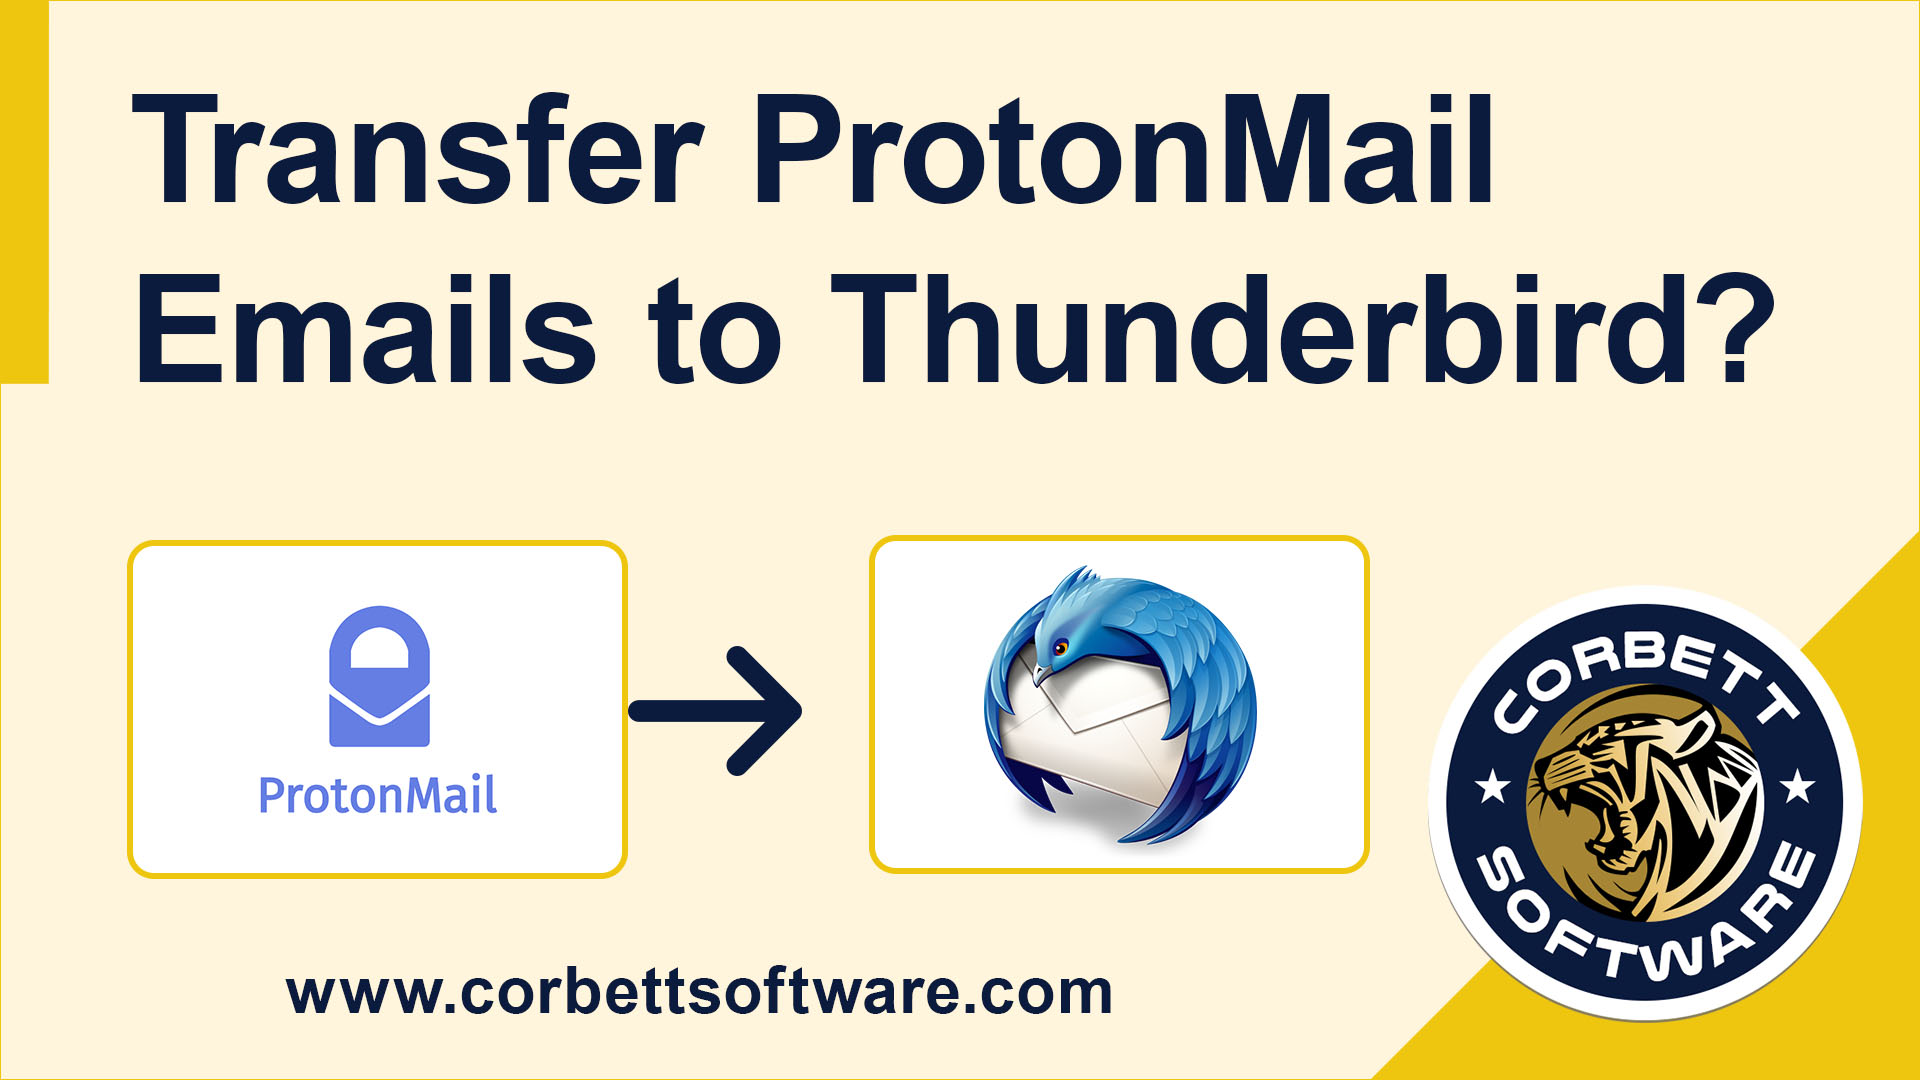 Transfer ProtonMail Emails to Thunderbird